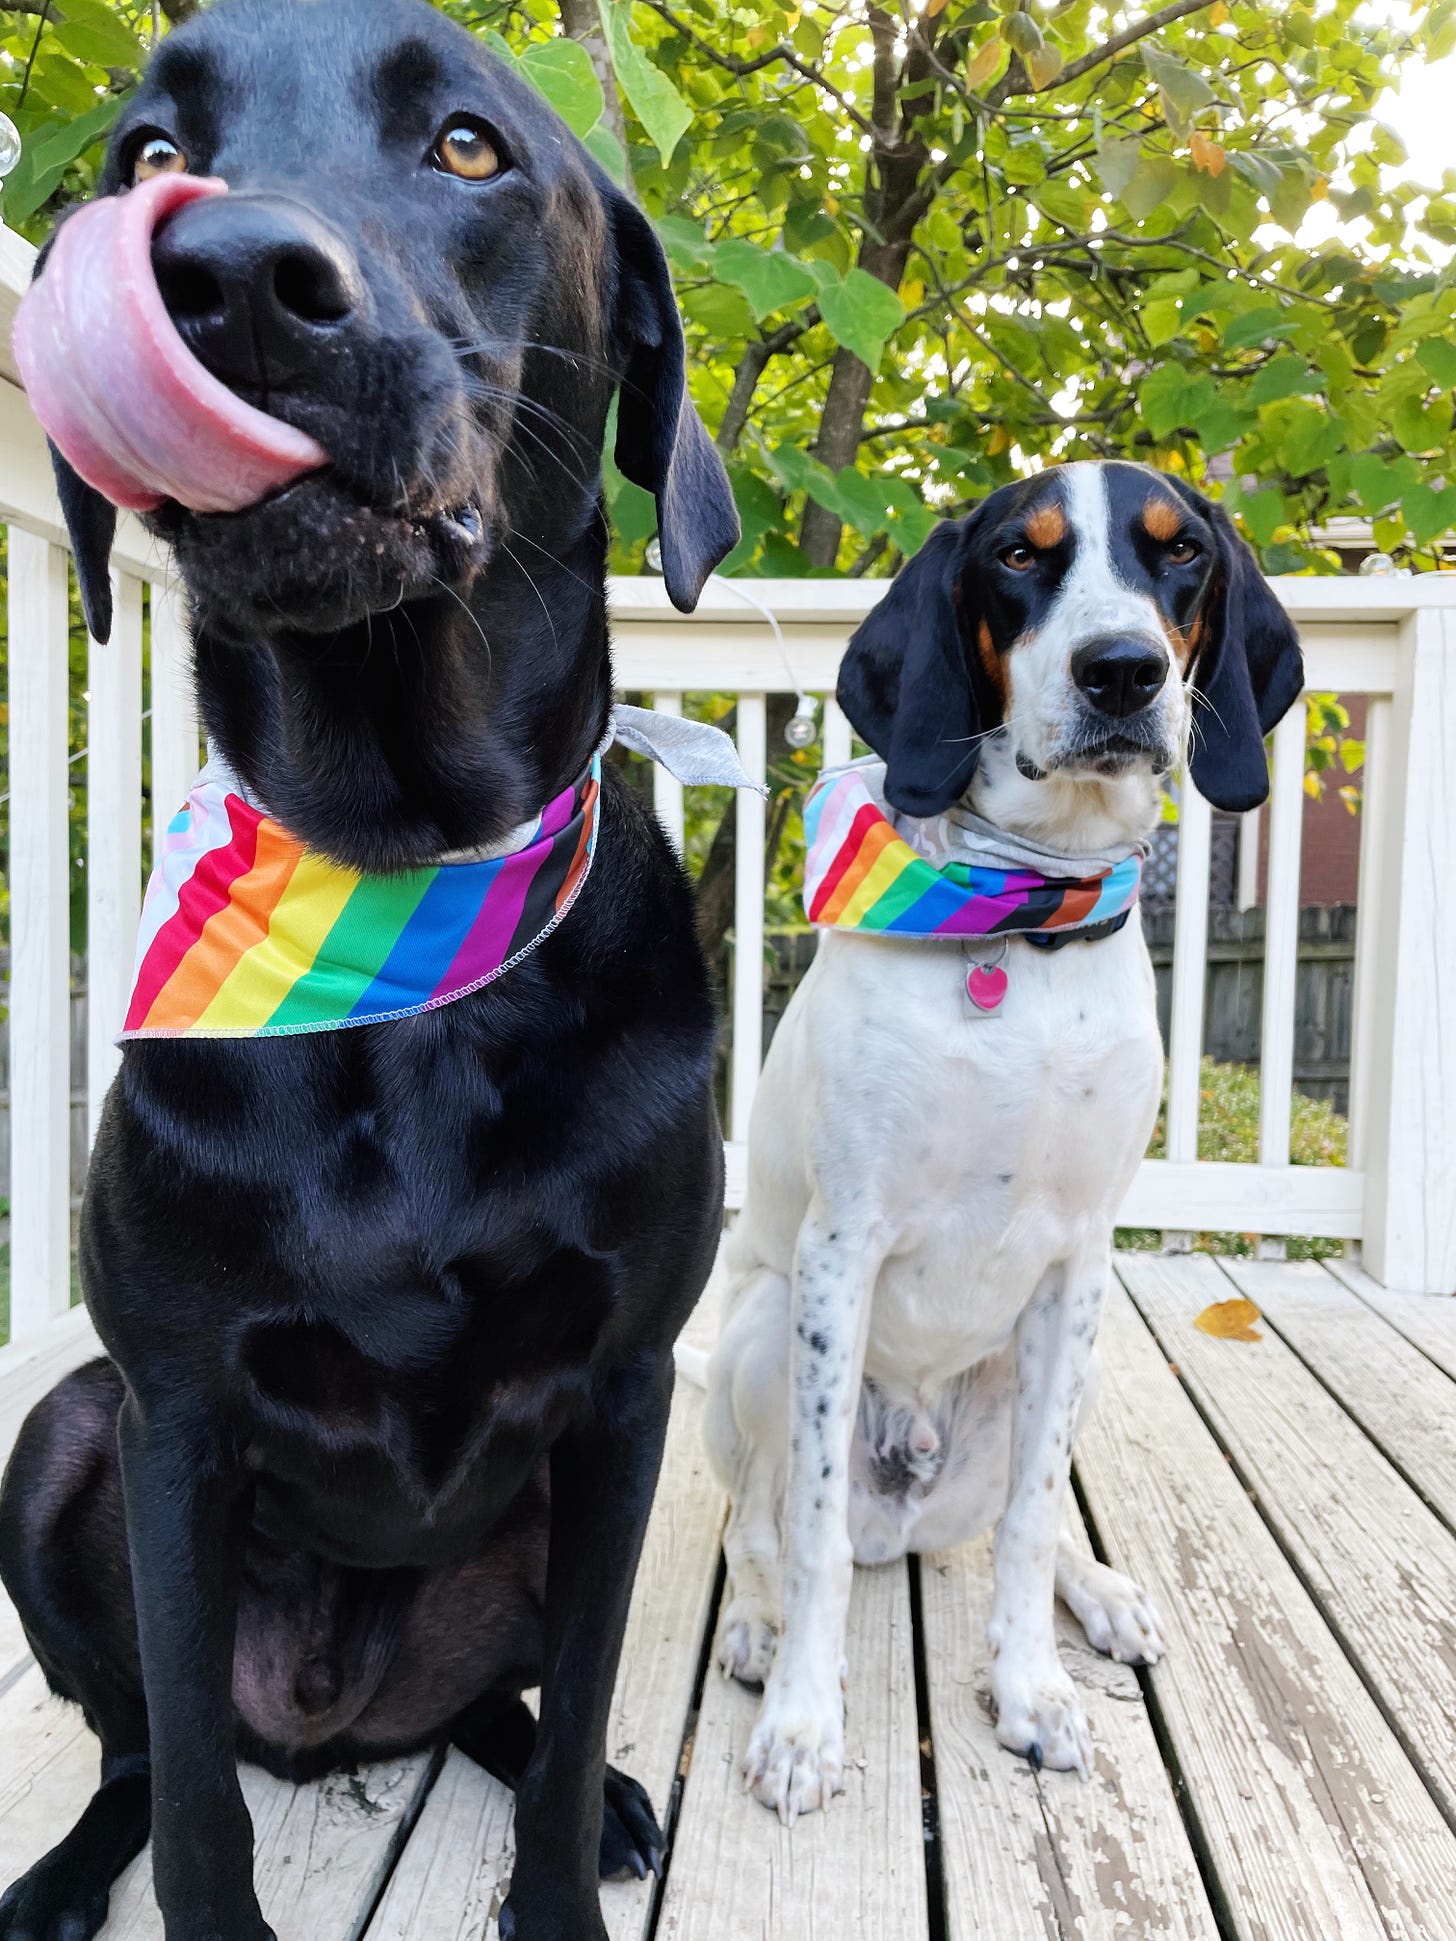 A picture of two dogs, one black and one white with black ears, sitting next to each other wearing rainbow bandanas.